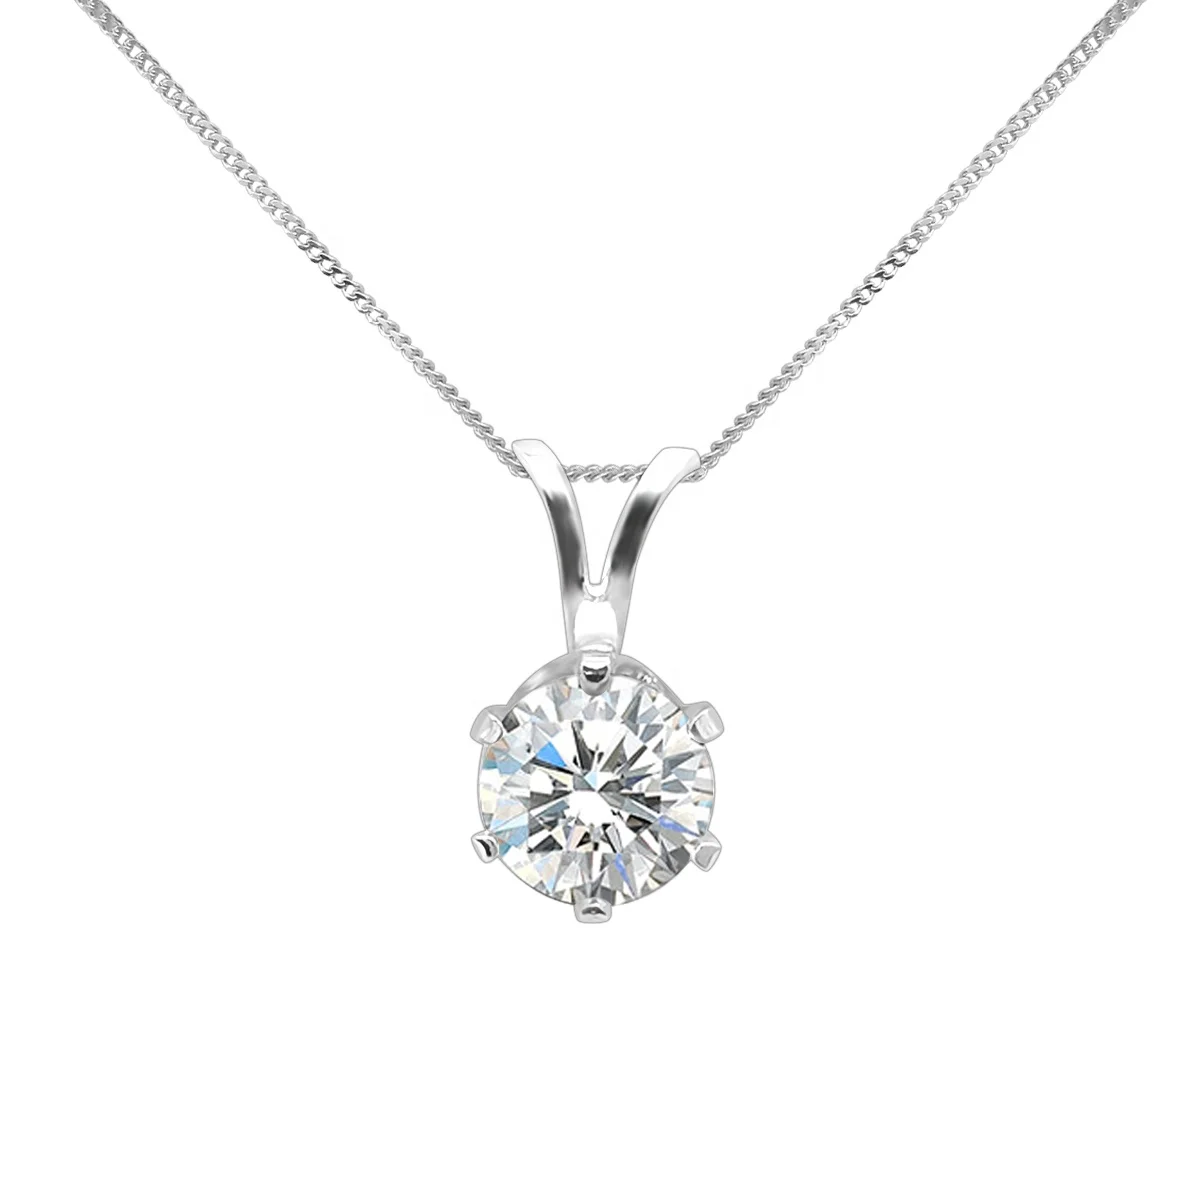 

2020 Classical style Necklace Gemstone Cubic Zirconia Jewelry 925 Sterling Silver In Round Shape CZ Pendant